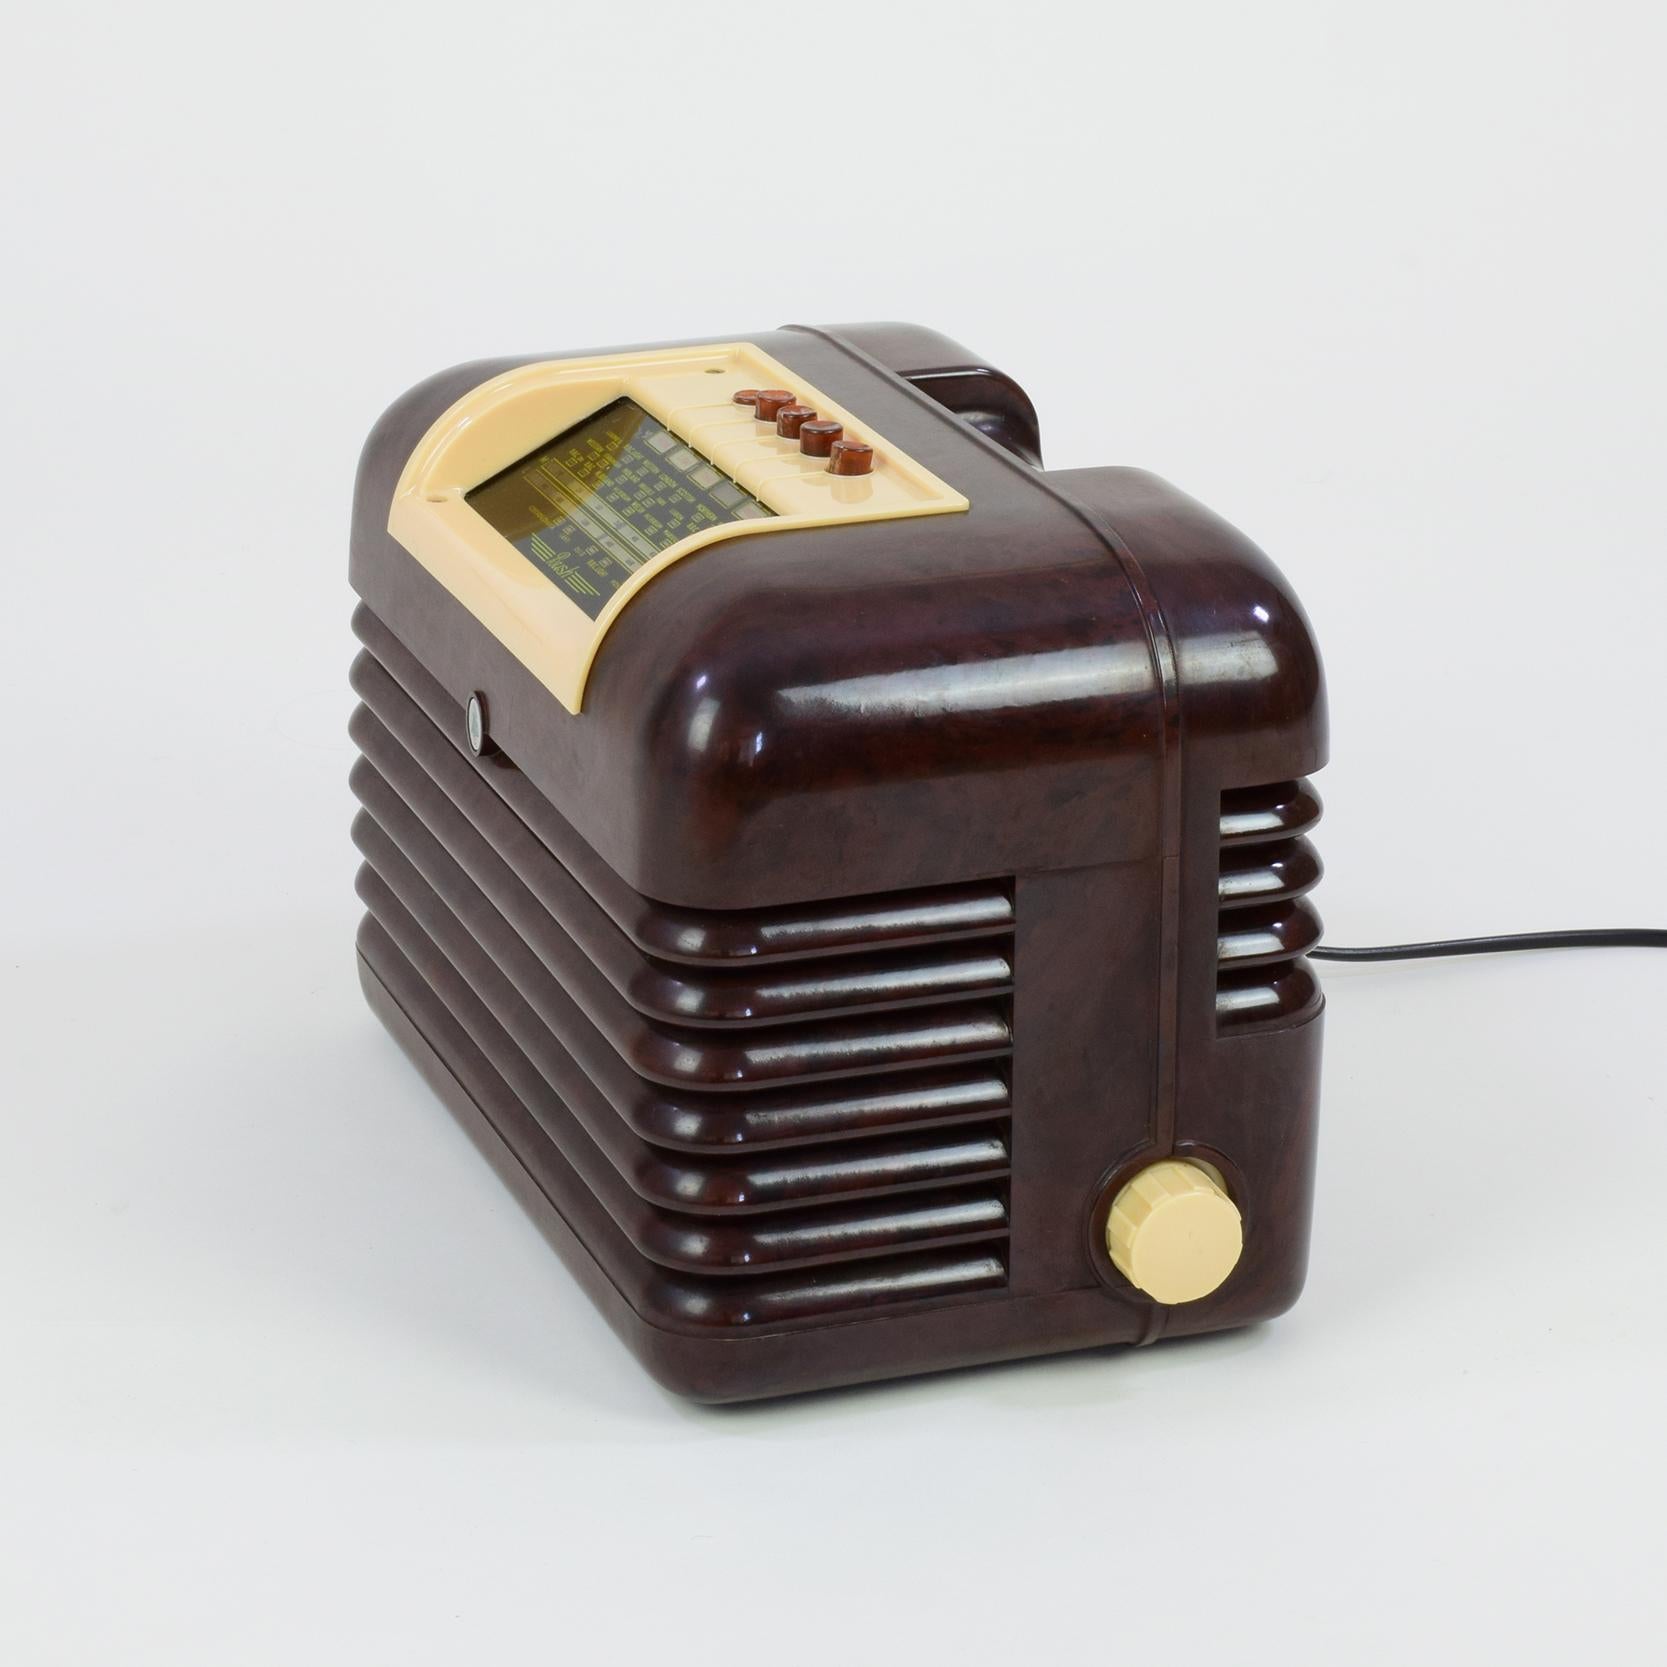 Bush Radio (manufacturer), UK

DAC10 tabletop MW and LW radio, designed, 1950, manufactured from 1950 to about 1957.

Bakelite case. Push-button and manual tuning. Mains 200-250 V, and can also work on 110 V (US) with a transformer.

A good